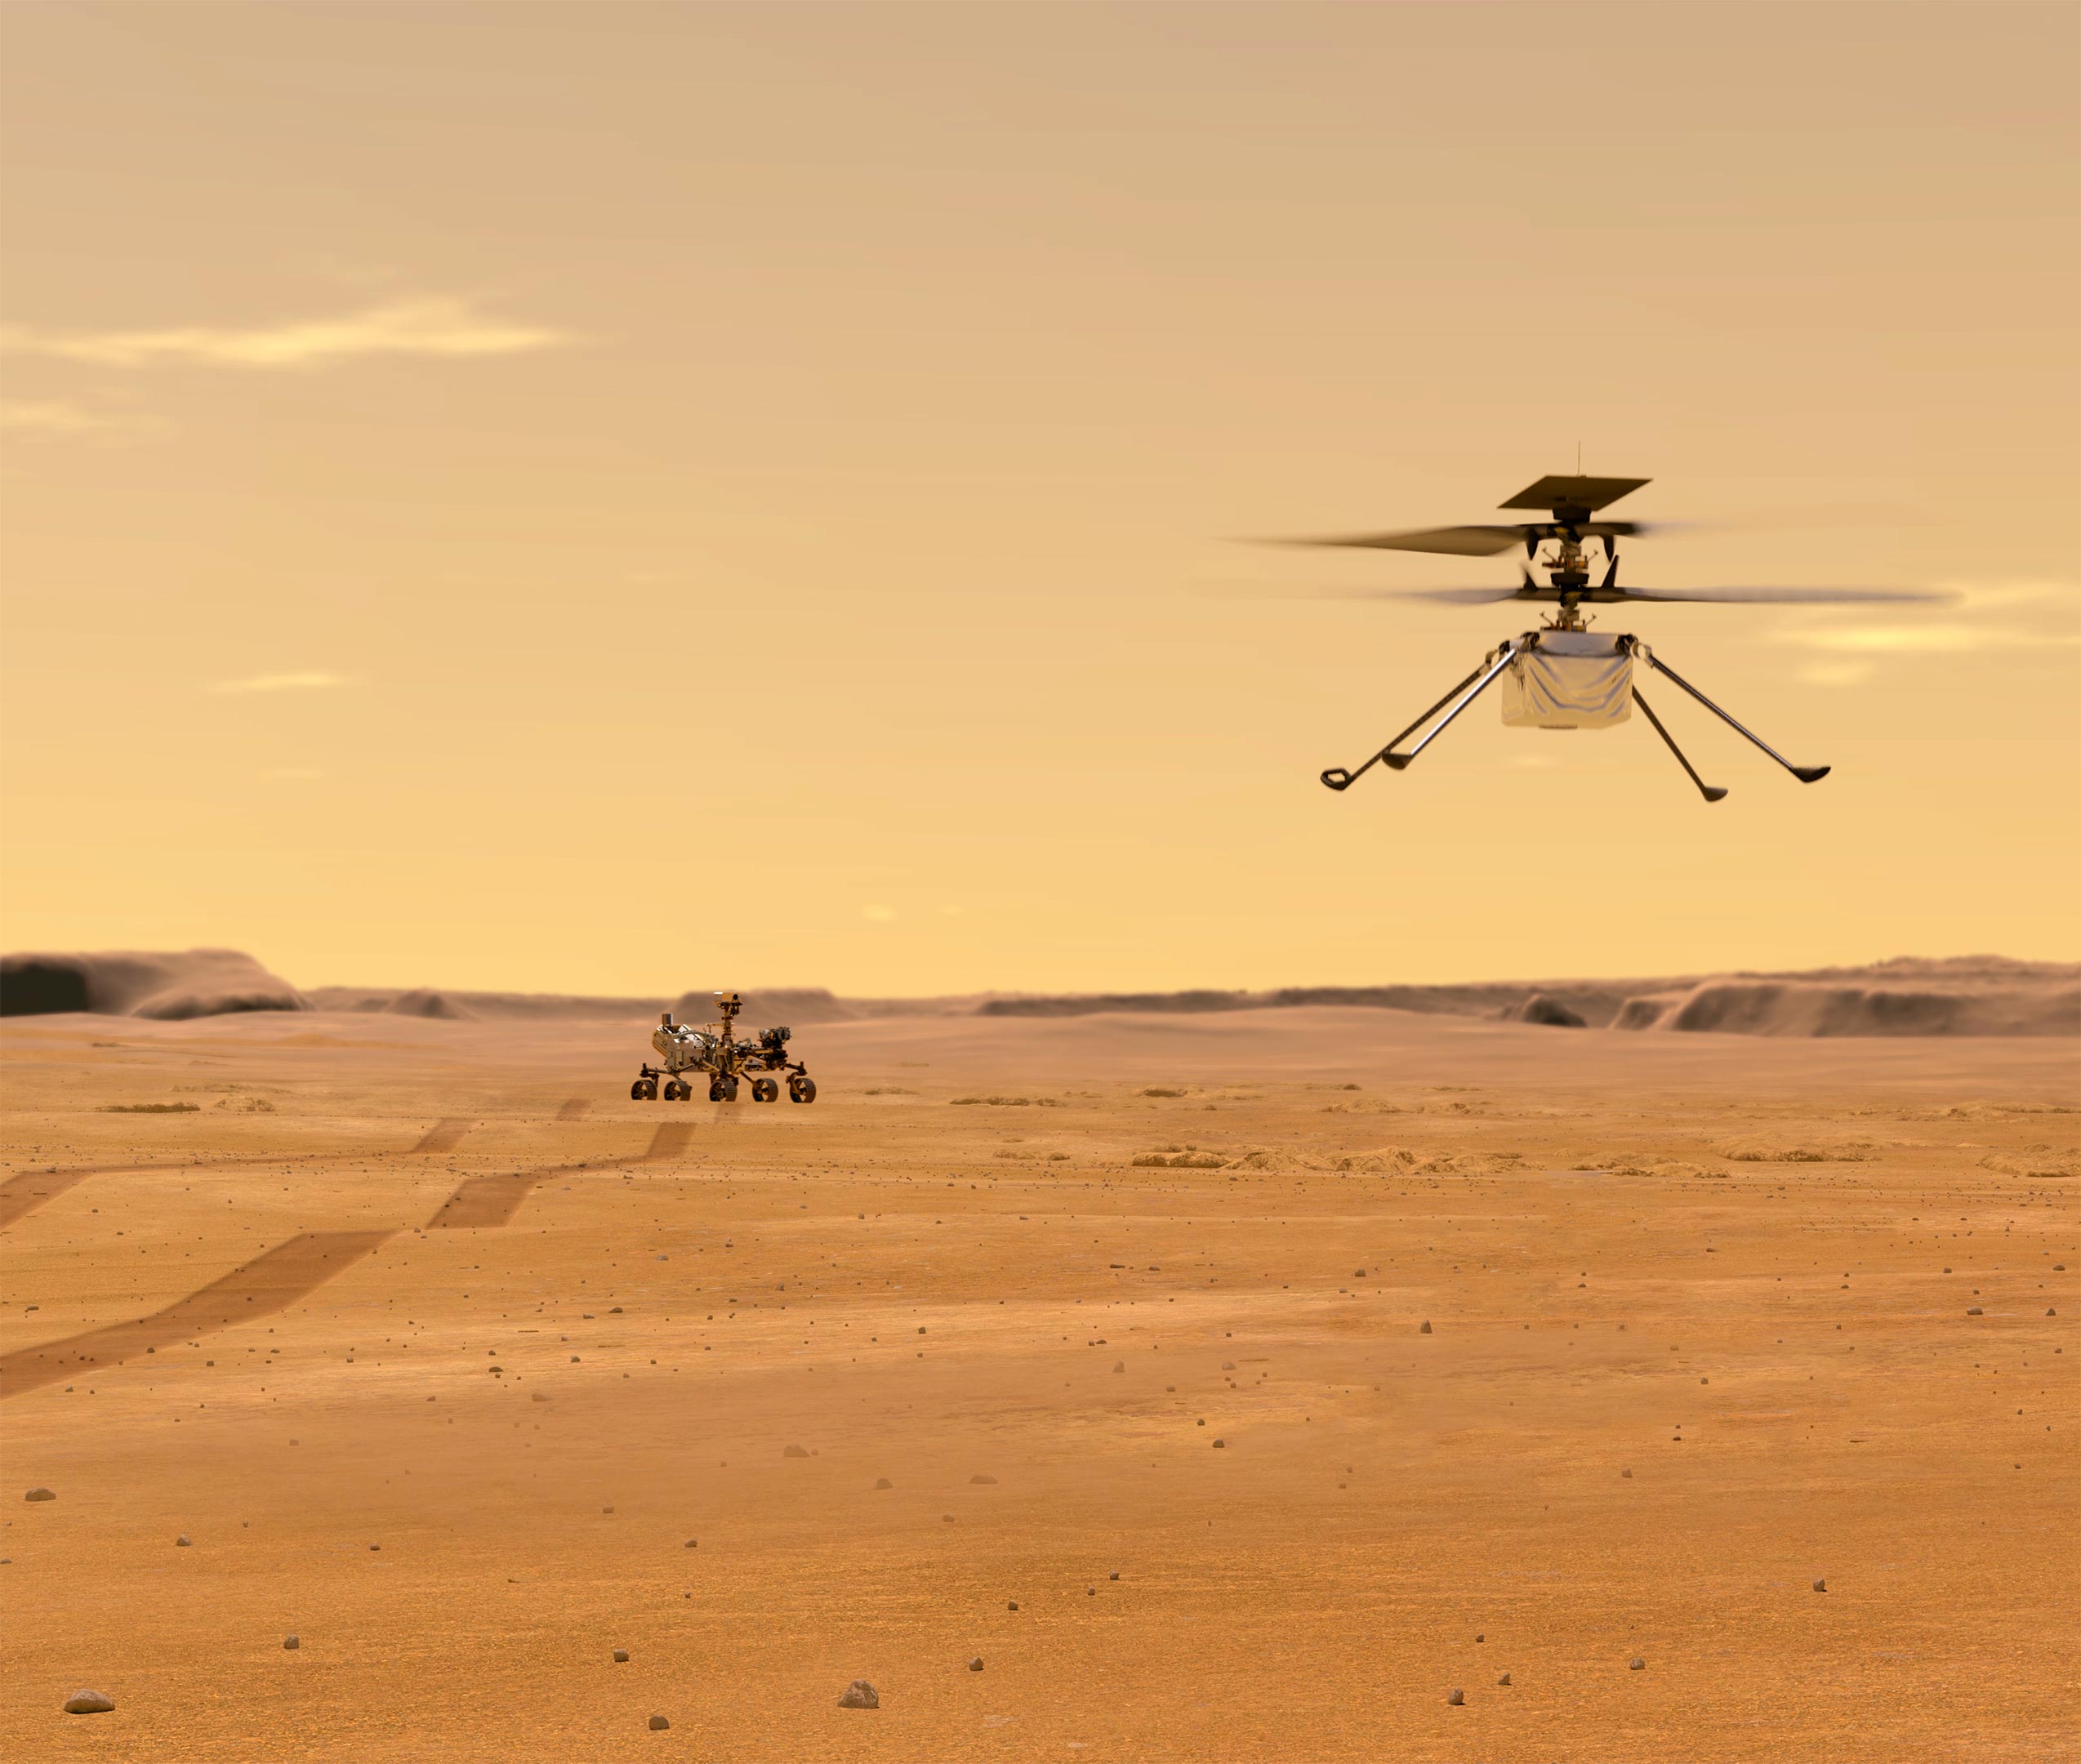 NASA’s Ingenuity Mars Helicopter Completes First Flight With New Navigation Software